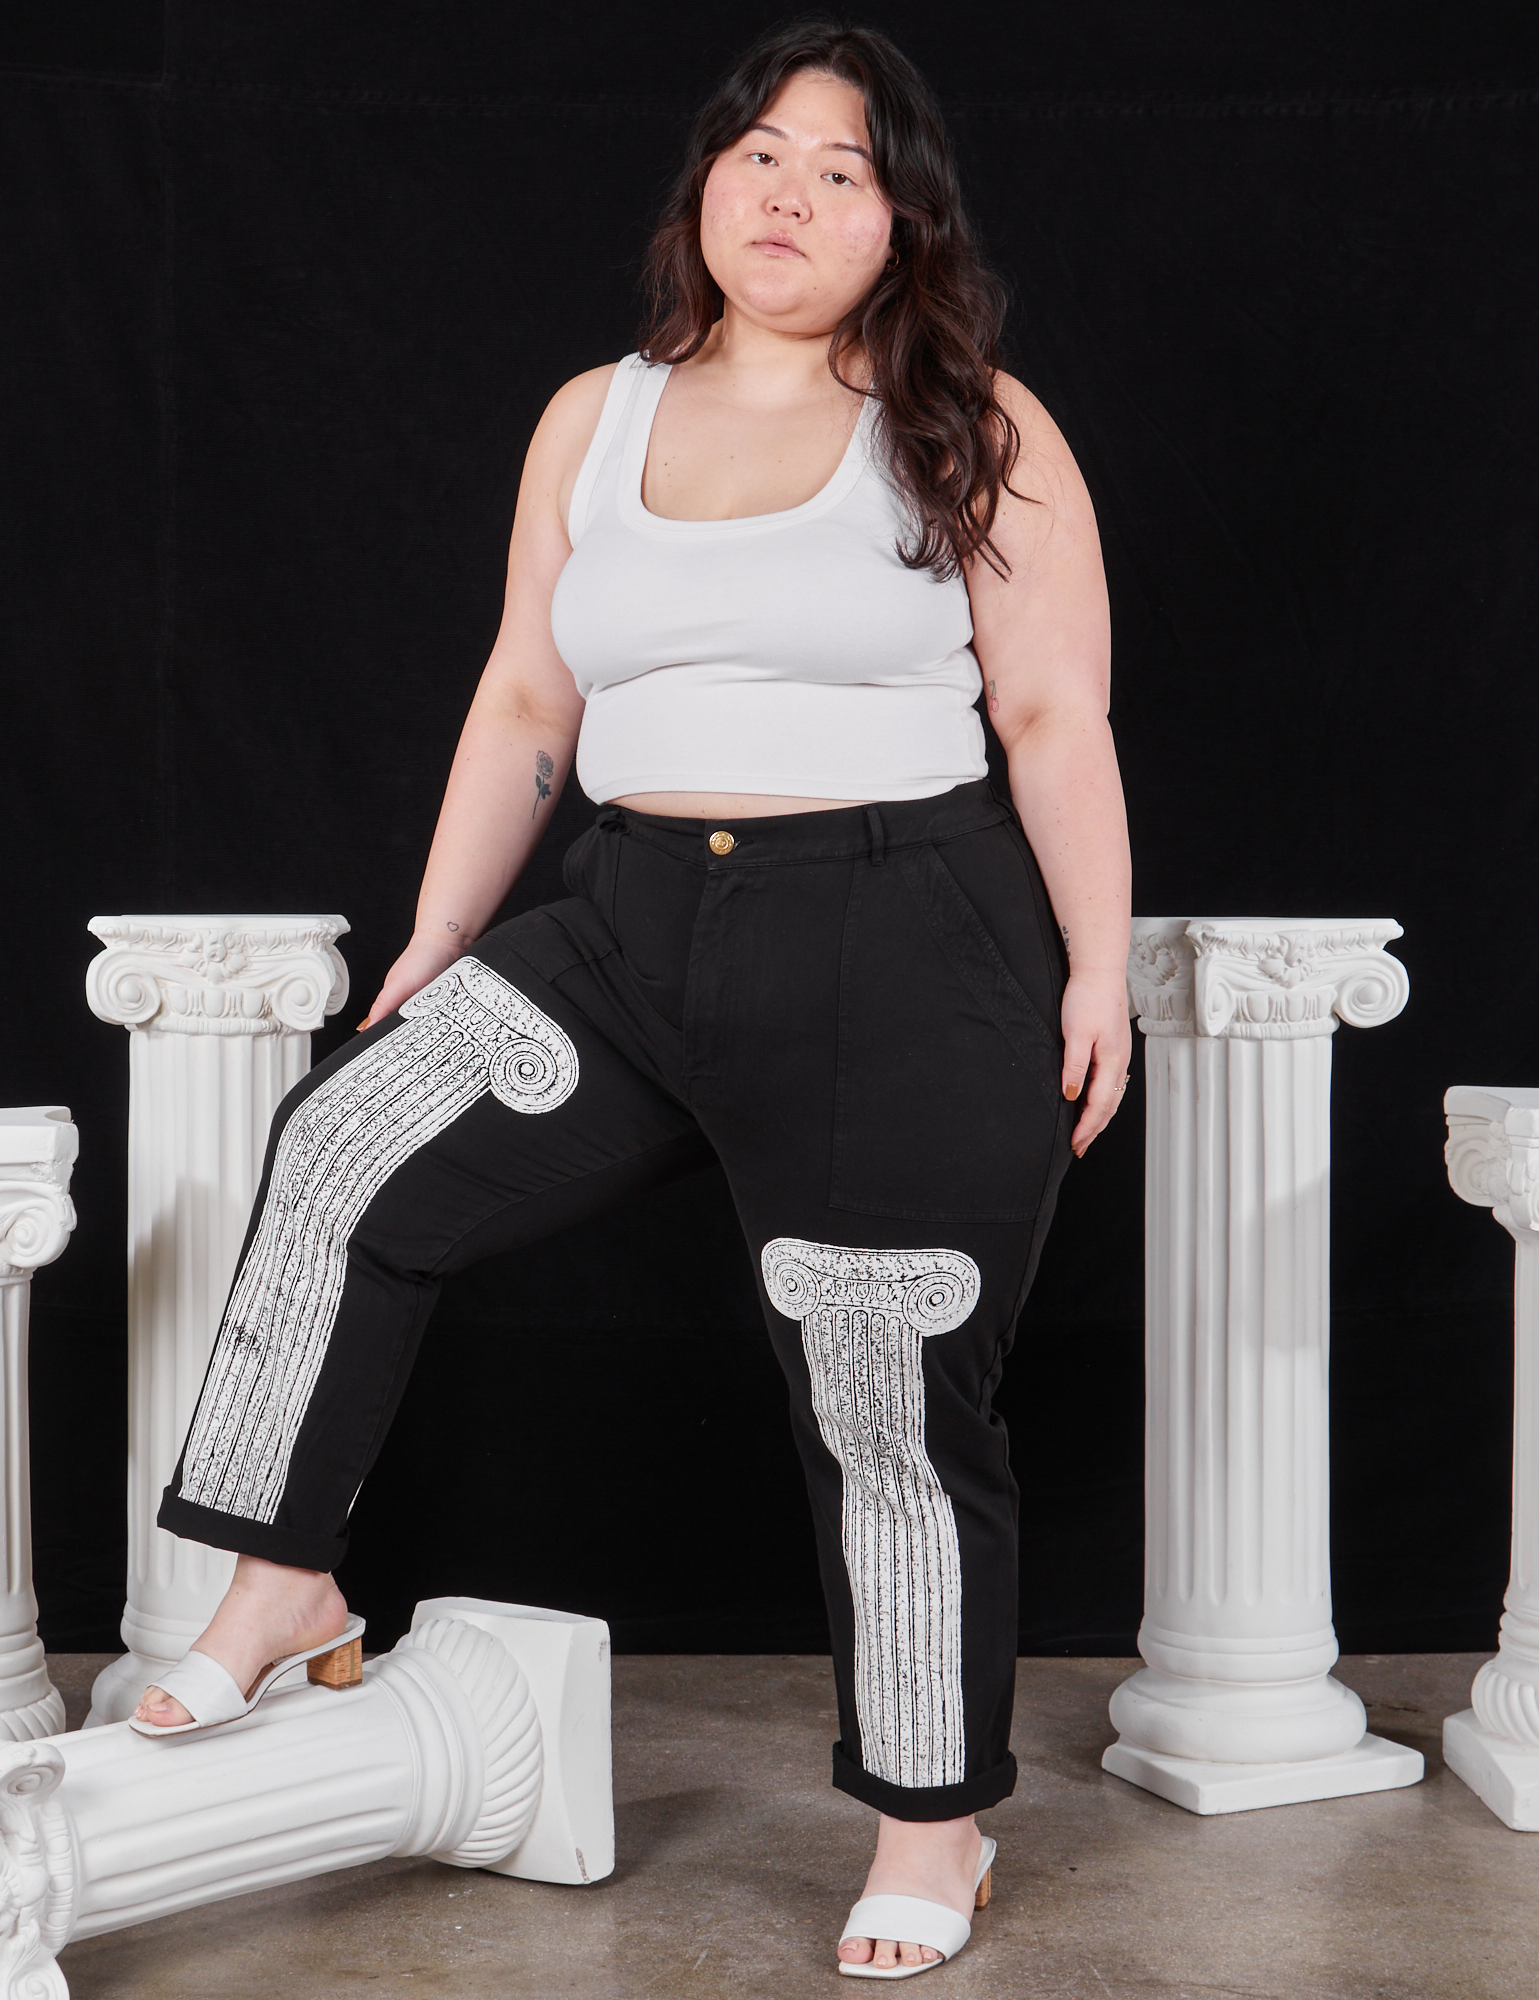 Ashley is wearing Column Work Pants in Basic Black and vintage off-white Cropped Tank Top